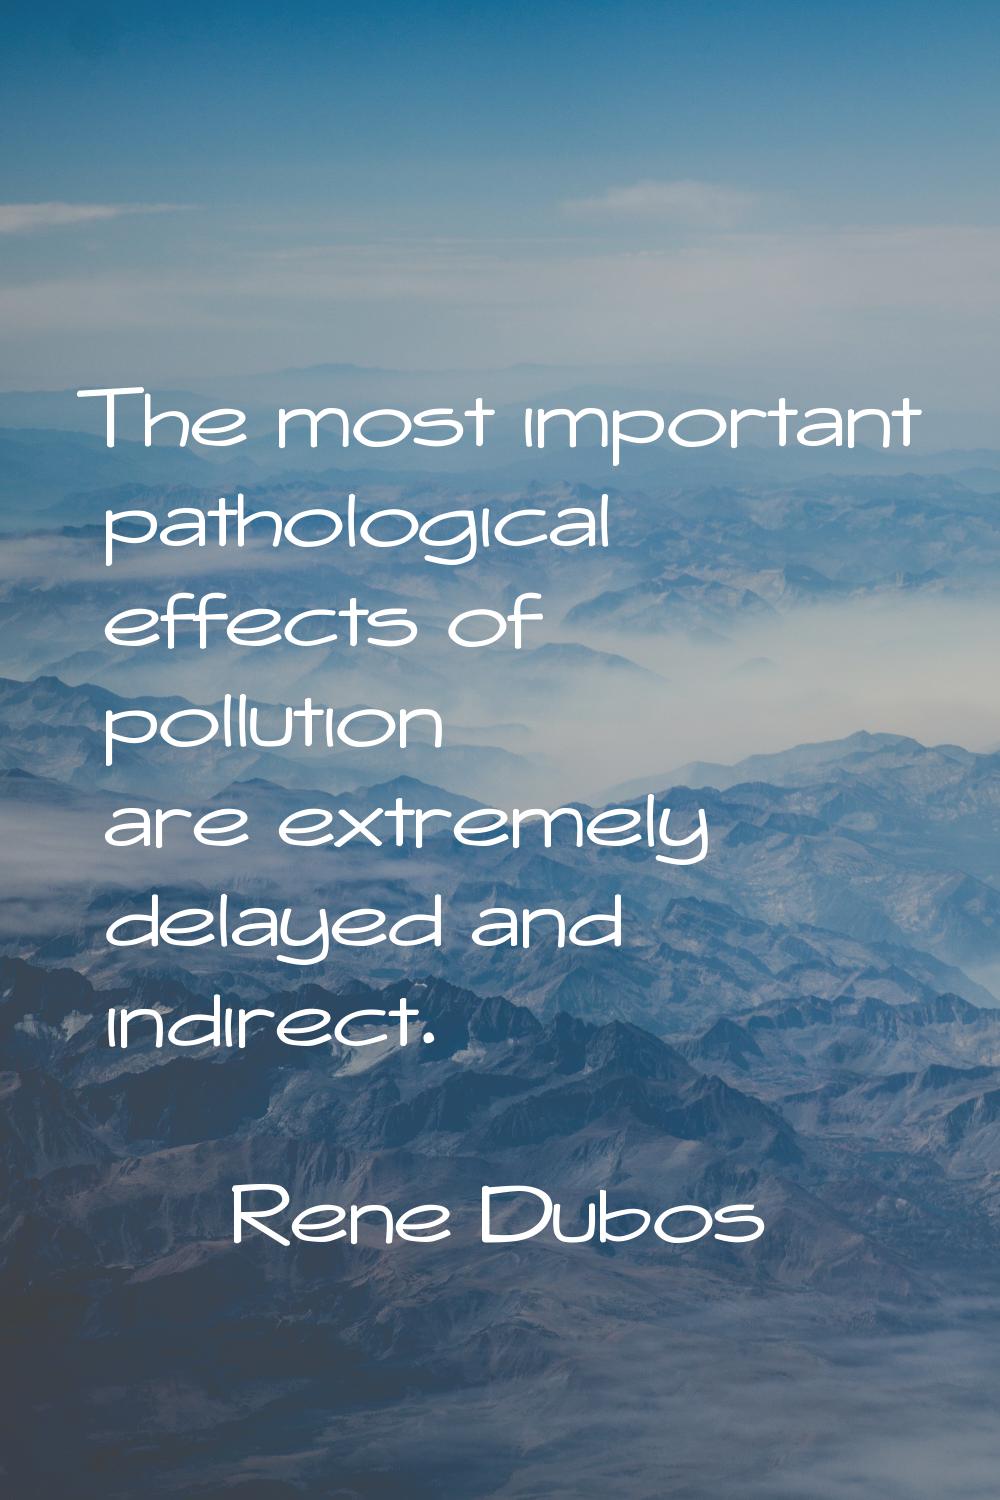 The most important pathological effects of pollution are extremely delayed and indirect.